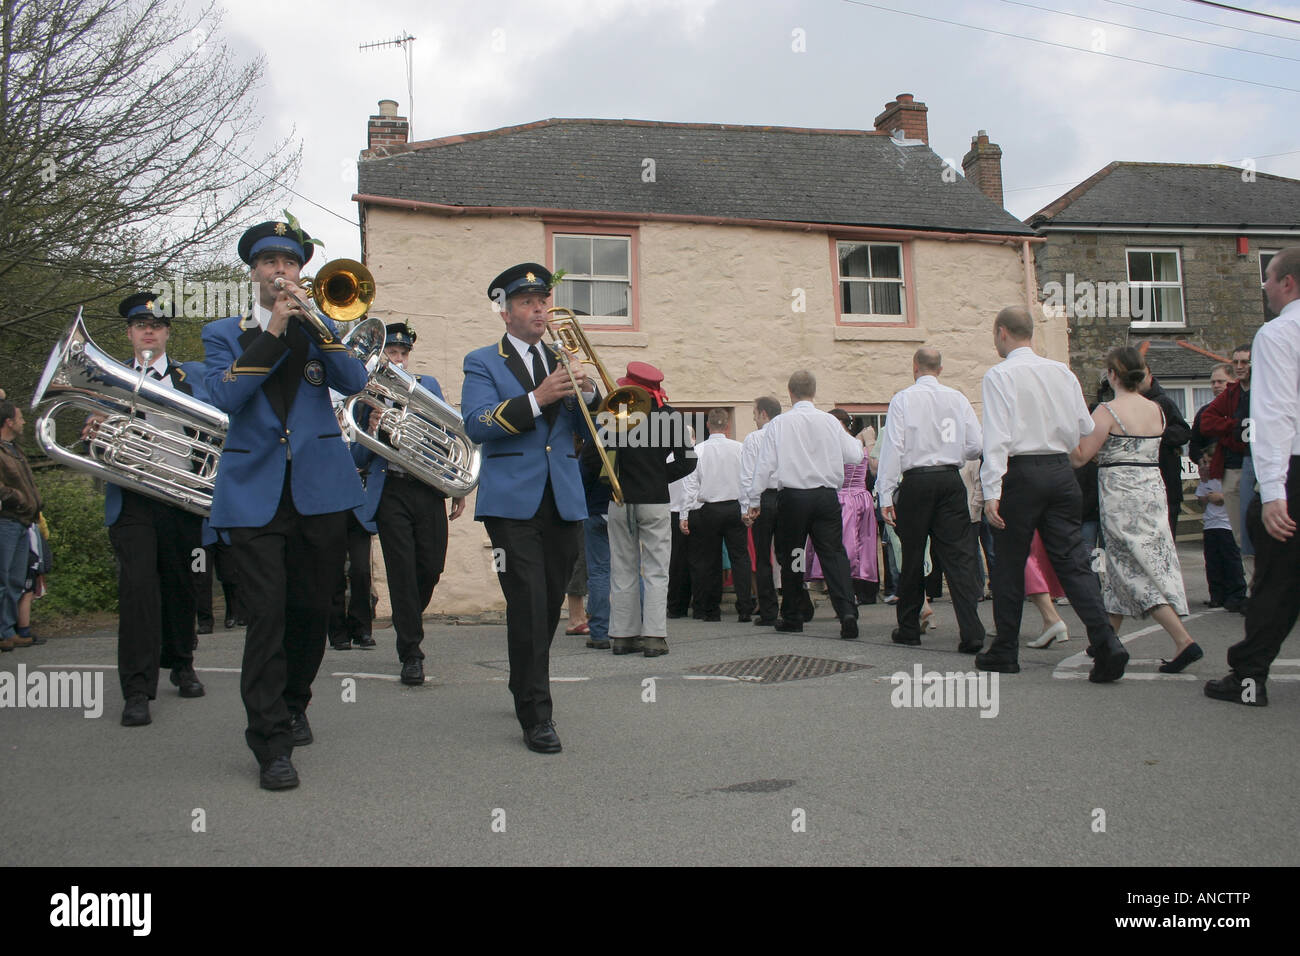 The Helston Town Band leads the annual procession in and out the houses during Helston's Mayday Furry Dance. Stock Photo